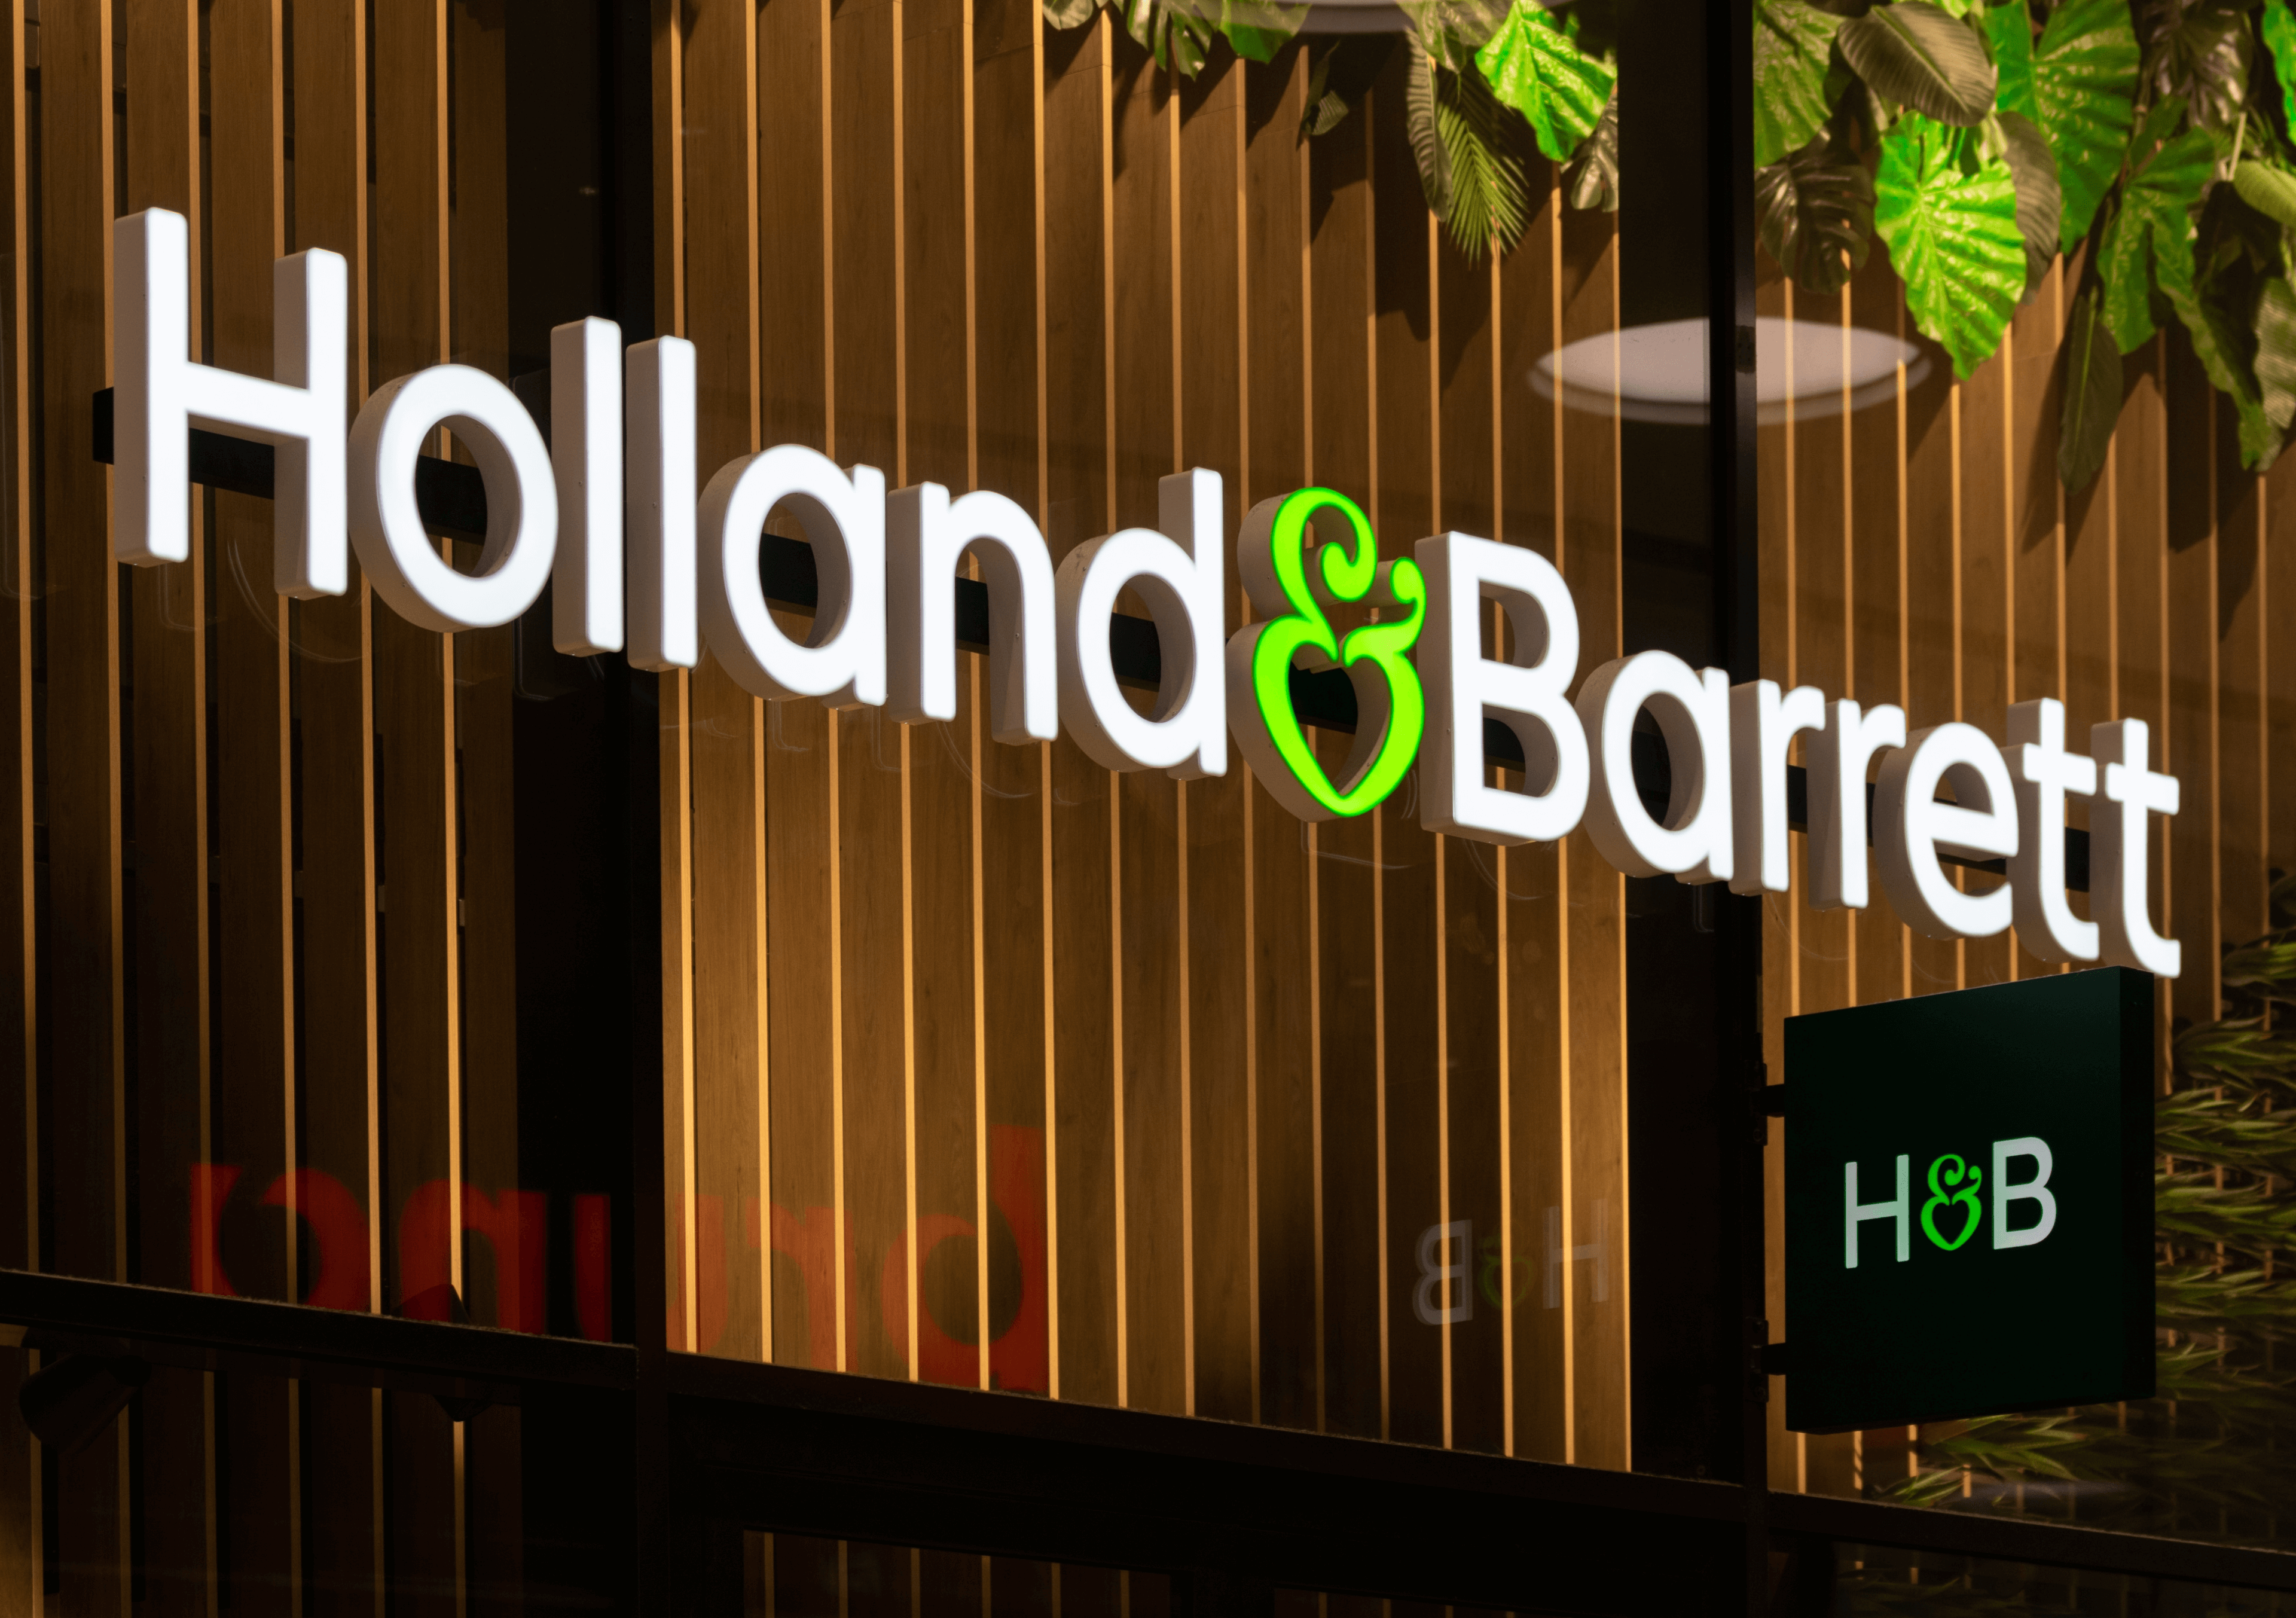 Picture of a Holland&Barrett store at night. The logo is well lit up and visible.